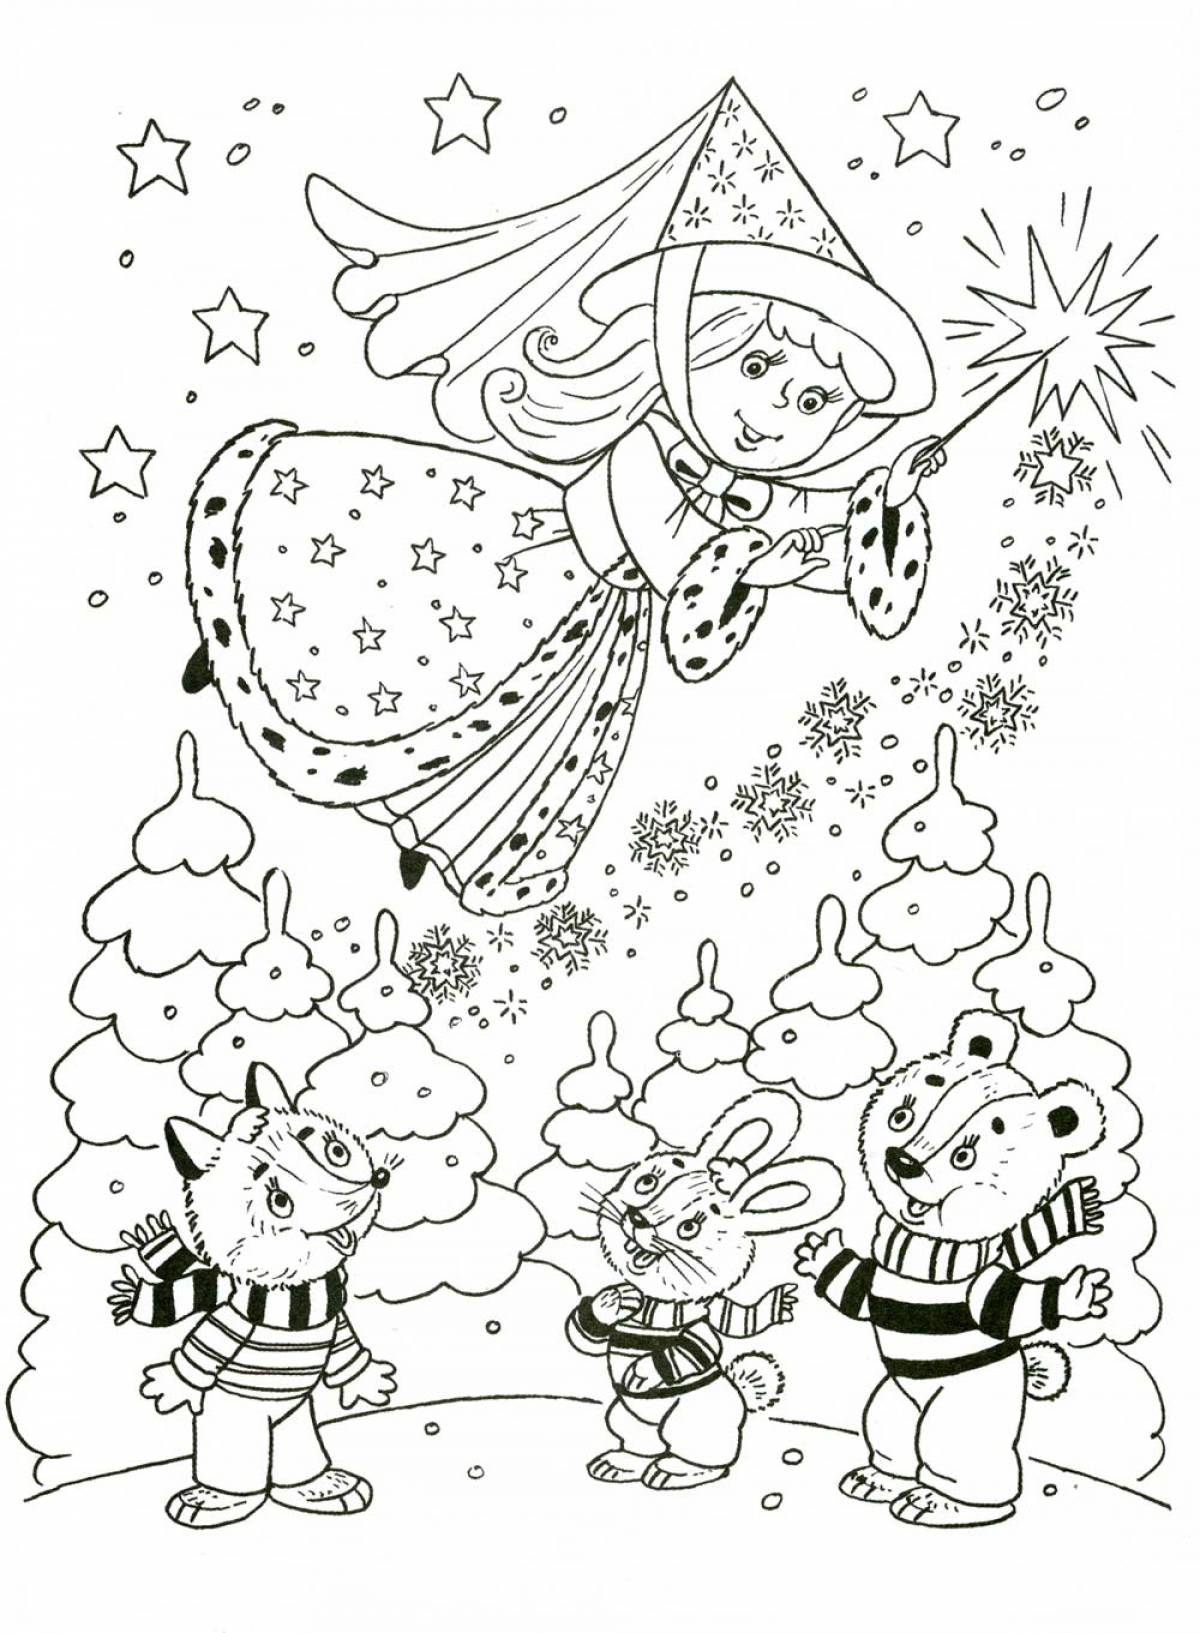 Winter fairy tale coloring page